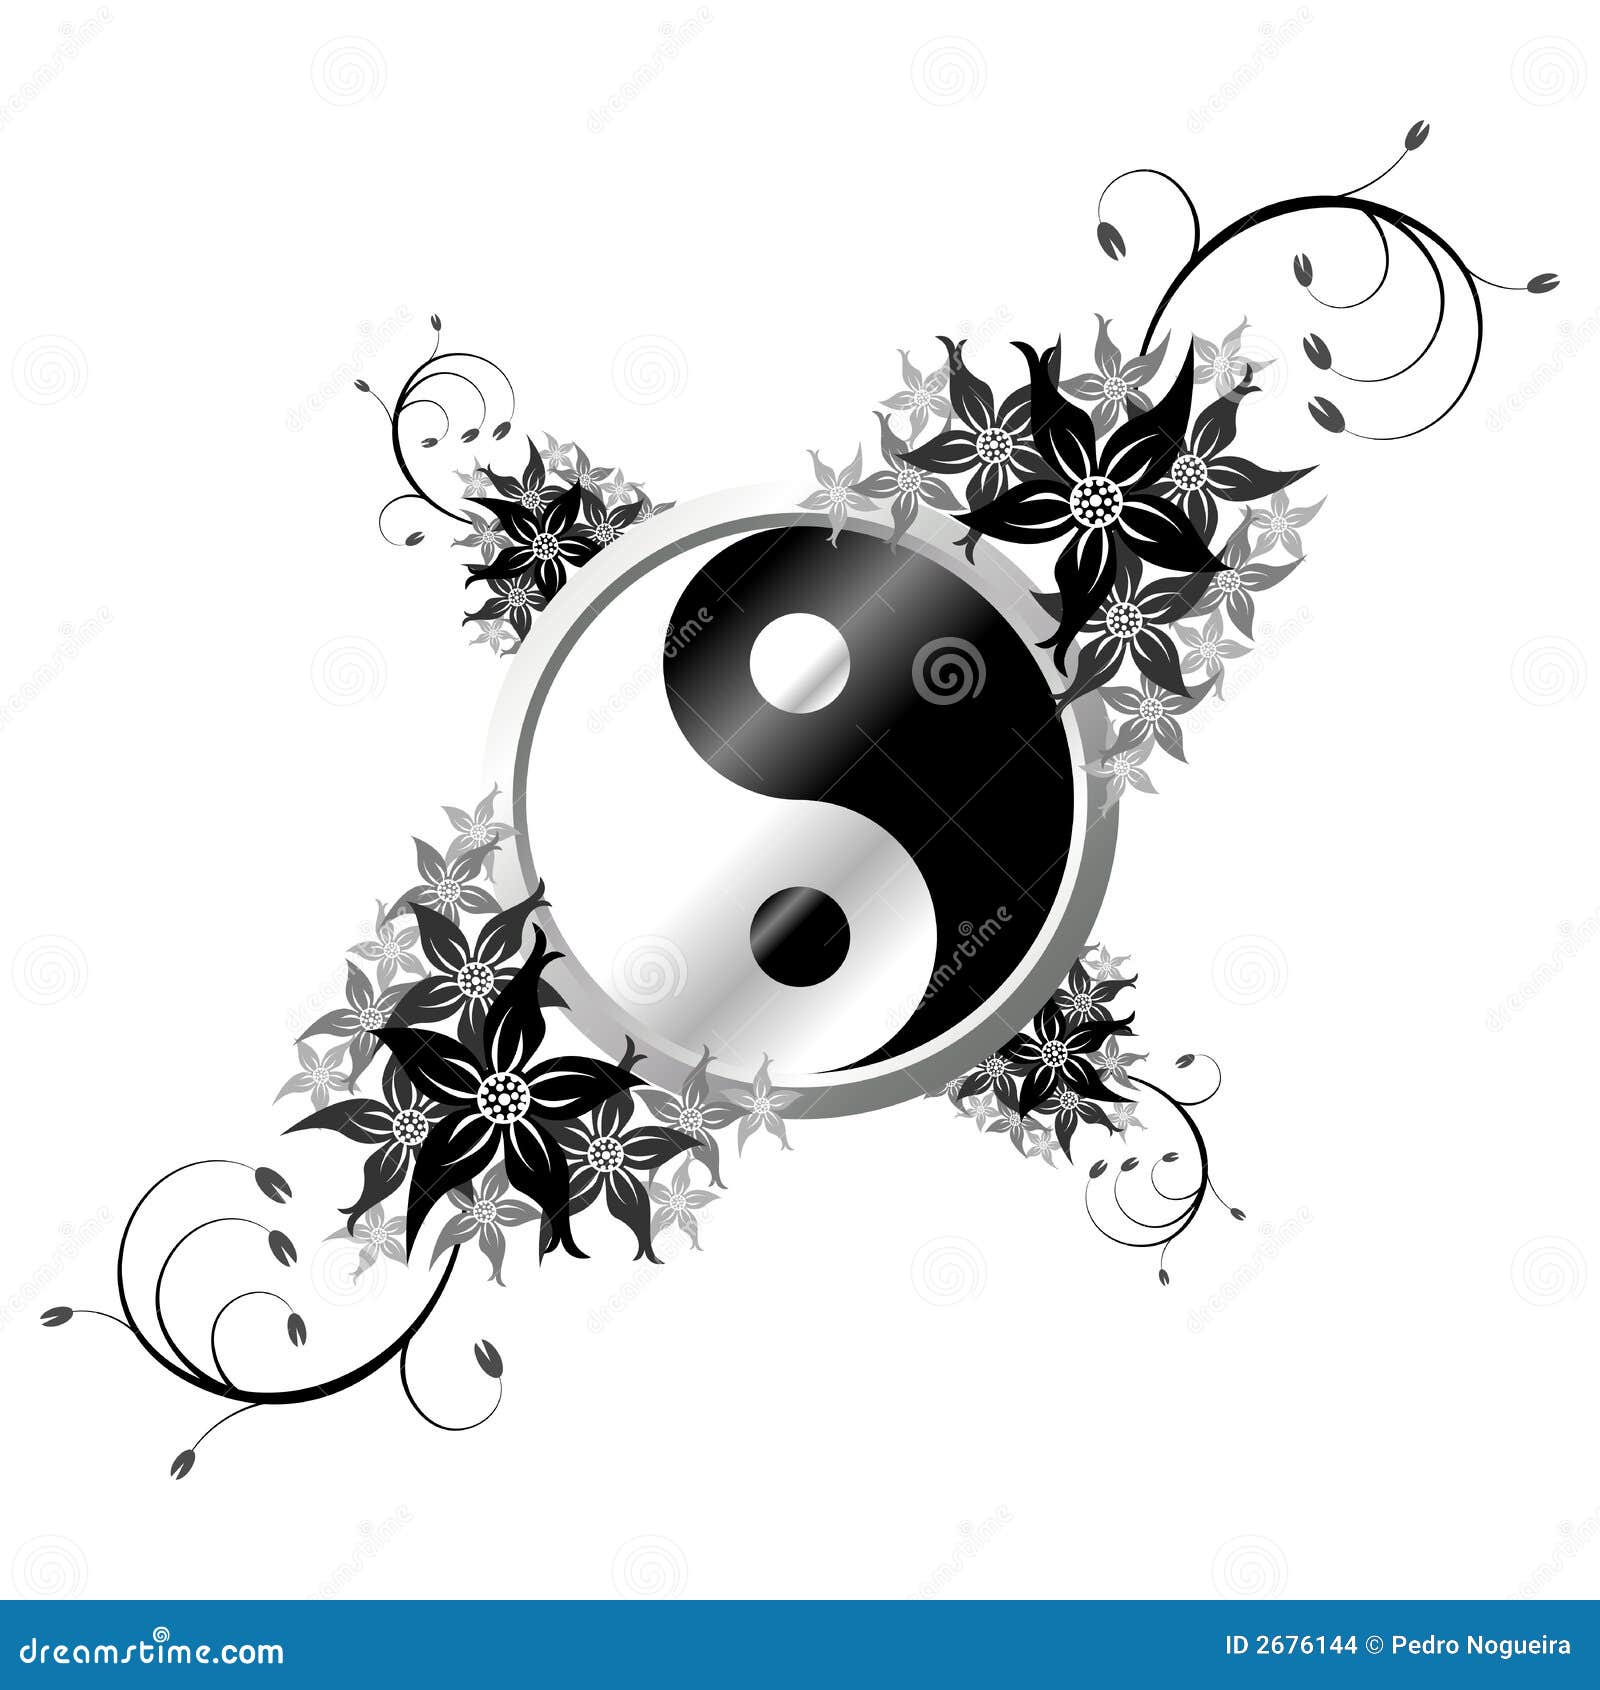 Yin Yang With Flowers Stock Images - Image: 2676144